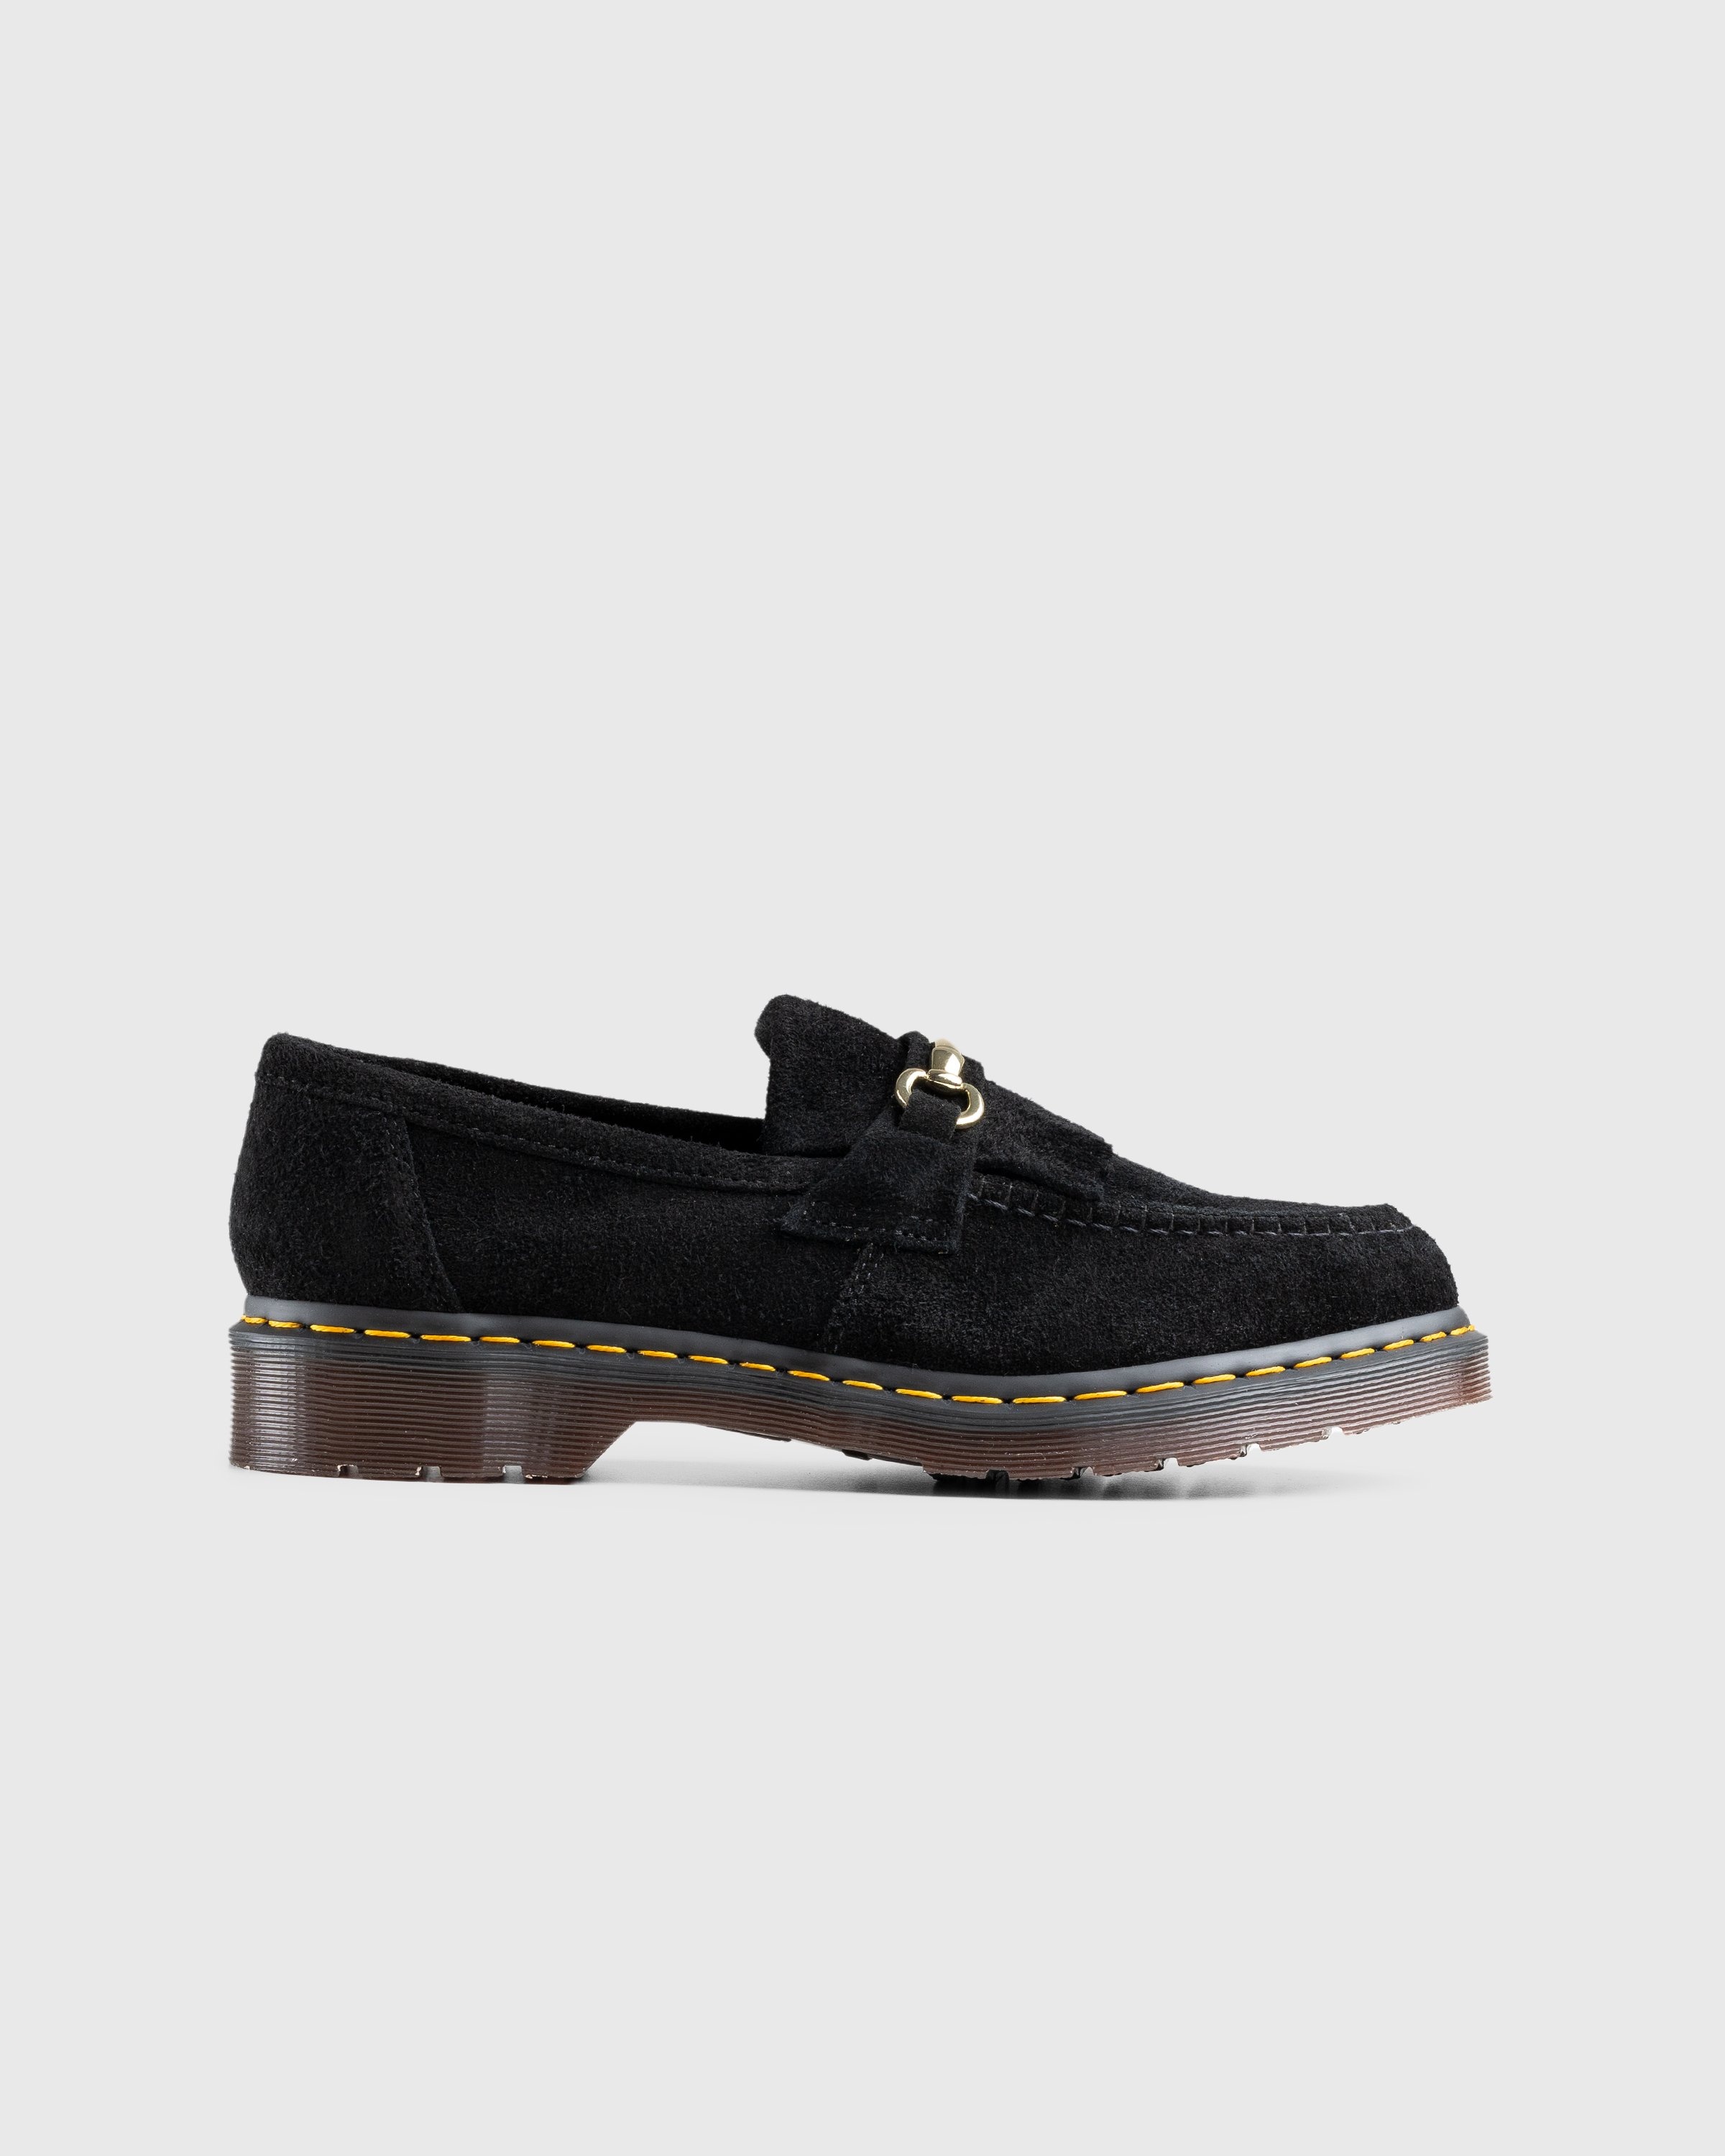 puff subject compression Dr. Martens – Adrian Snaffle Suede Loafers Black Desert Oasis Suede Gum Oil  | Highsnobiety Shop